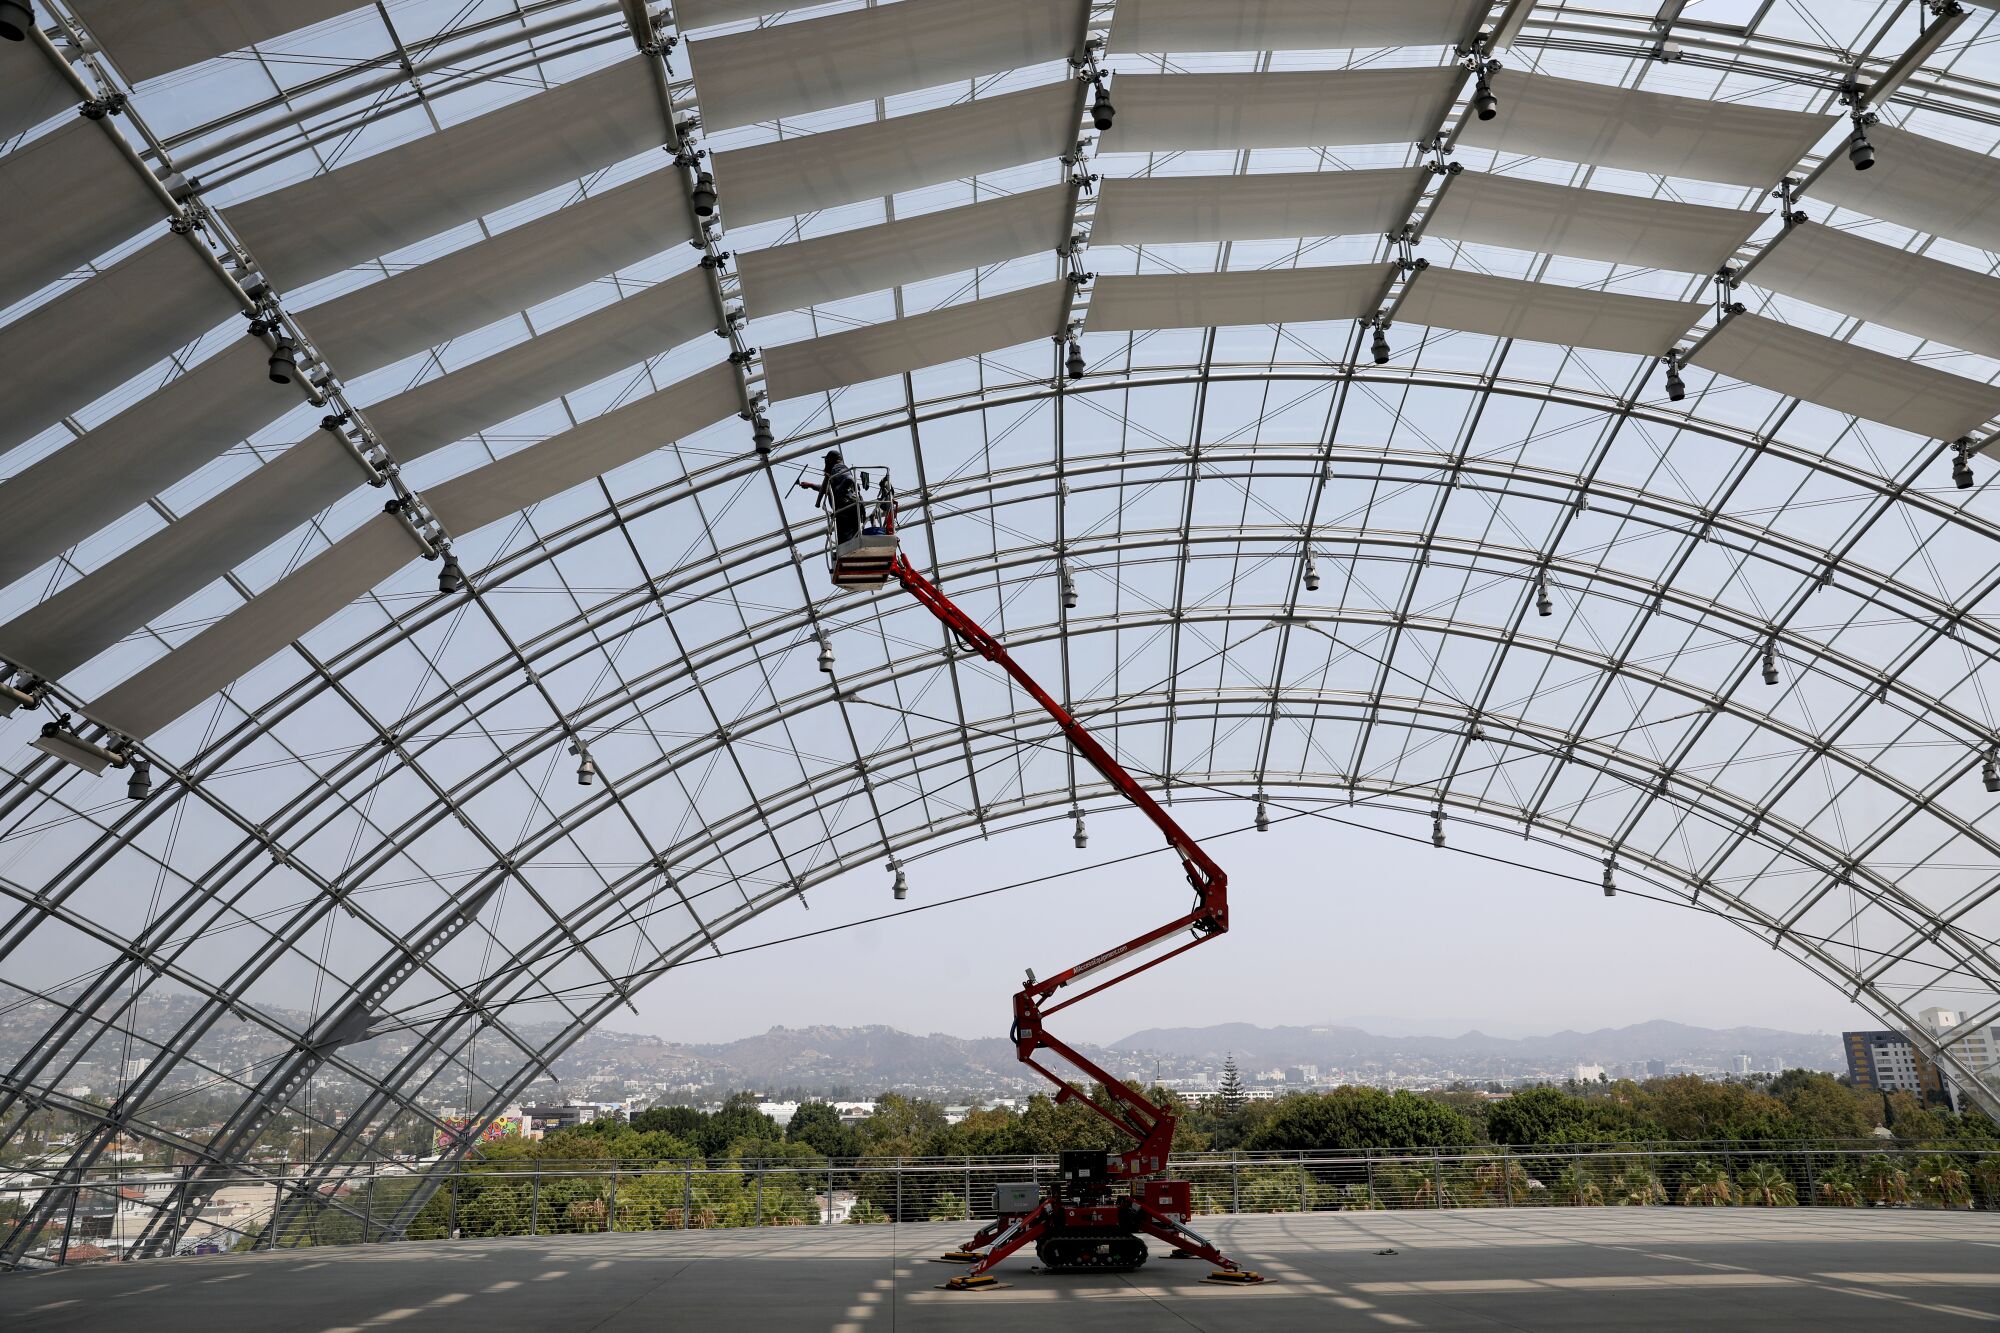  Jaime Vazquez, maintenance, cleans the glass dome covering the Dolby Family Terrace on the sphere 